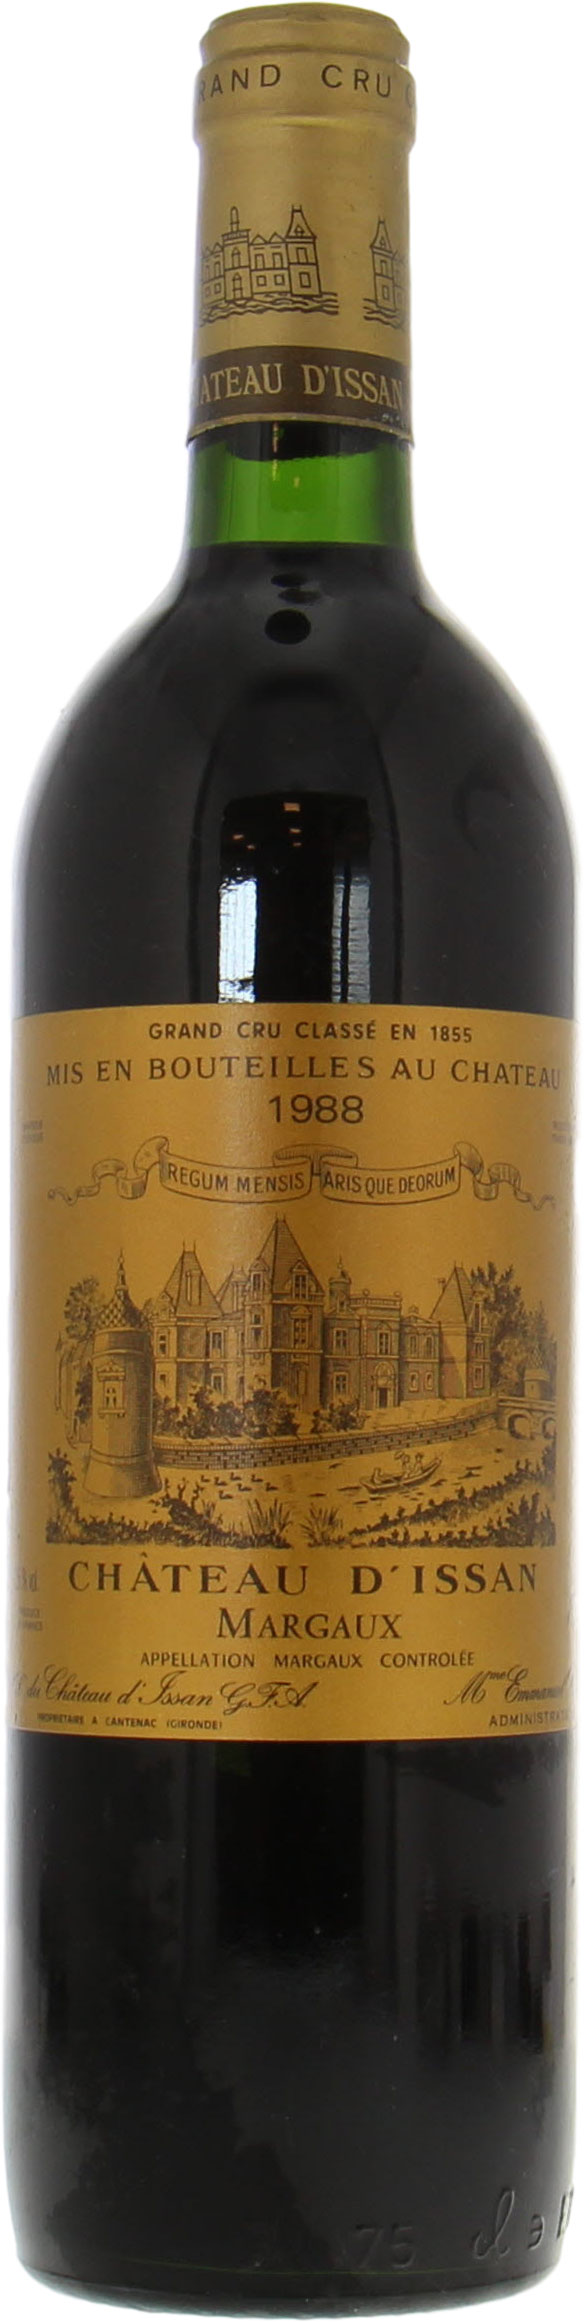 Chateau D'Issan - Chateau D'Issan 1988